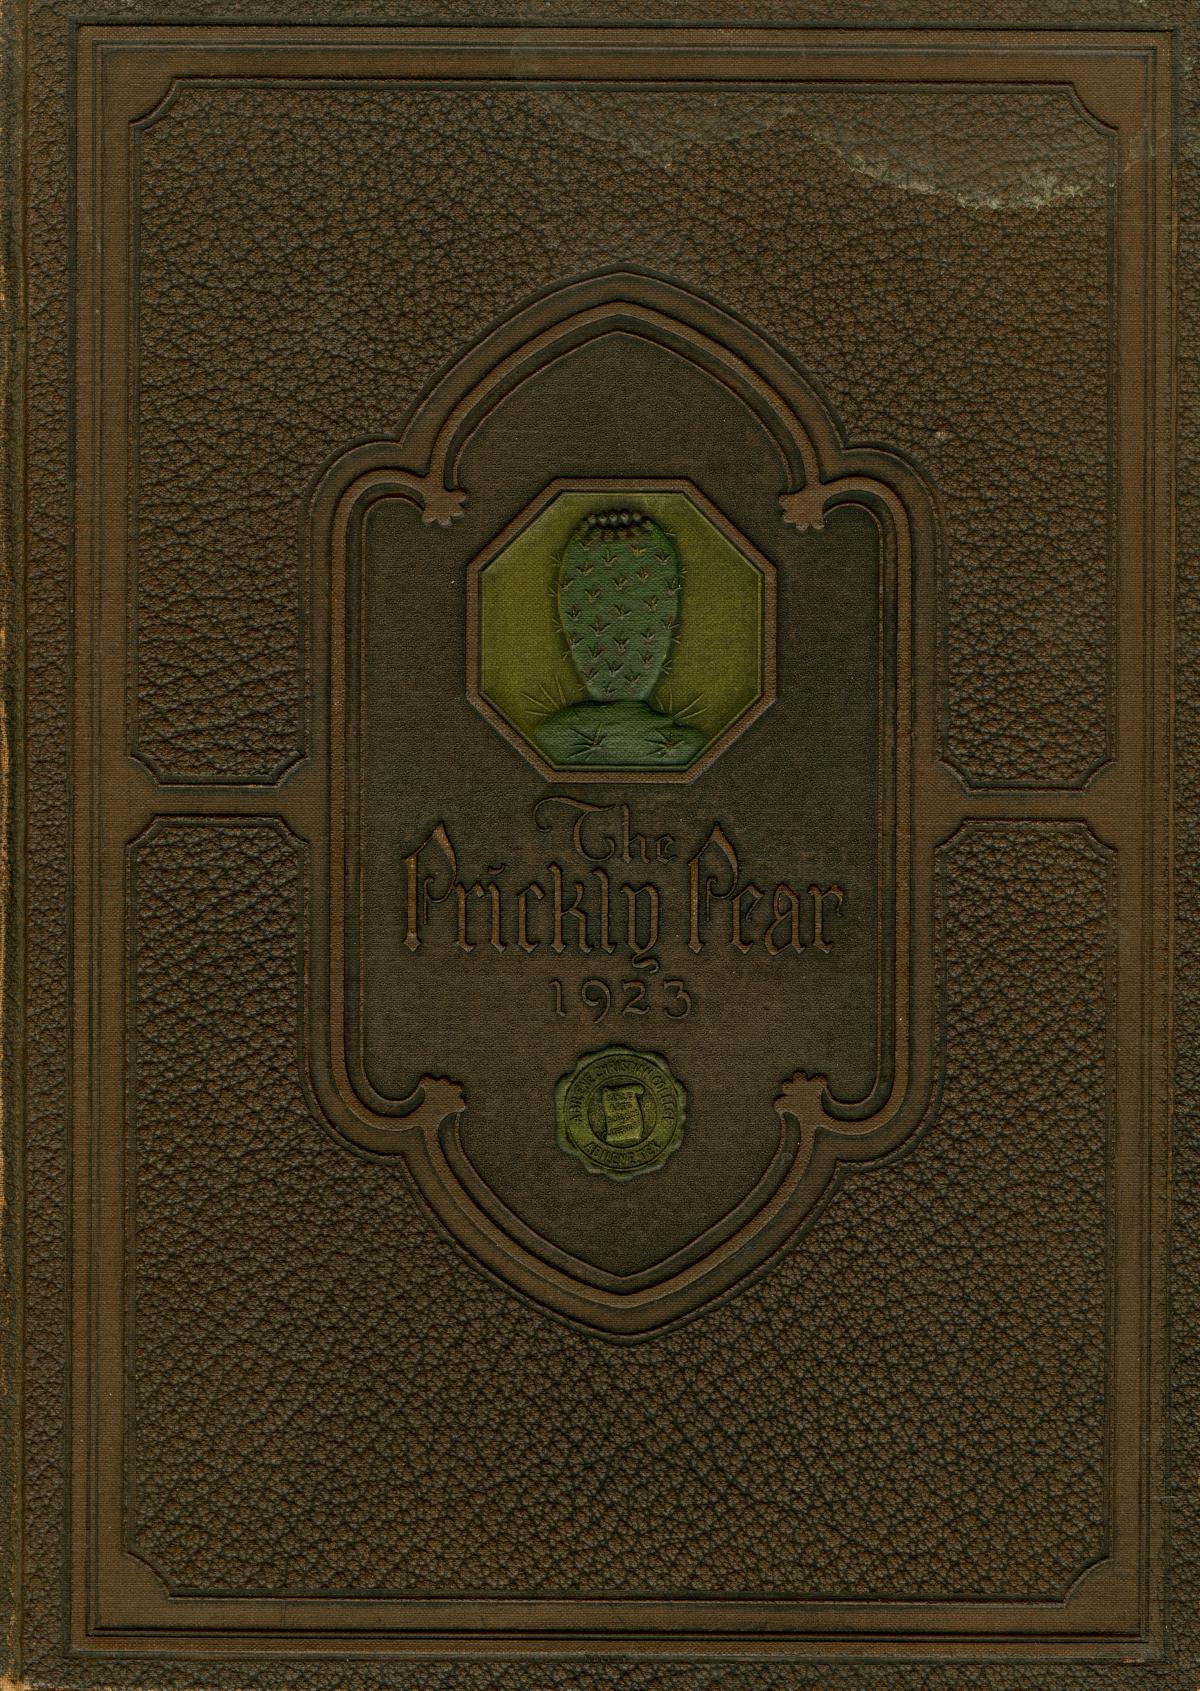 Prickly Pear, Yearbook of Abilene Christian College, 1923
                                                
                                                    Front Cover
                                                